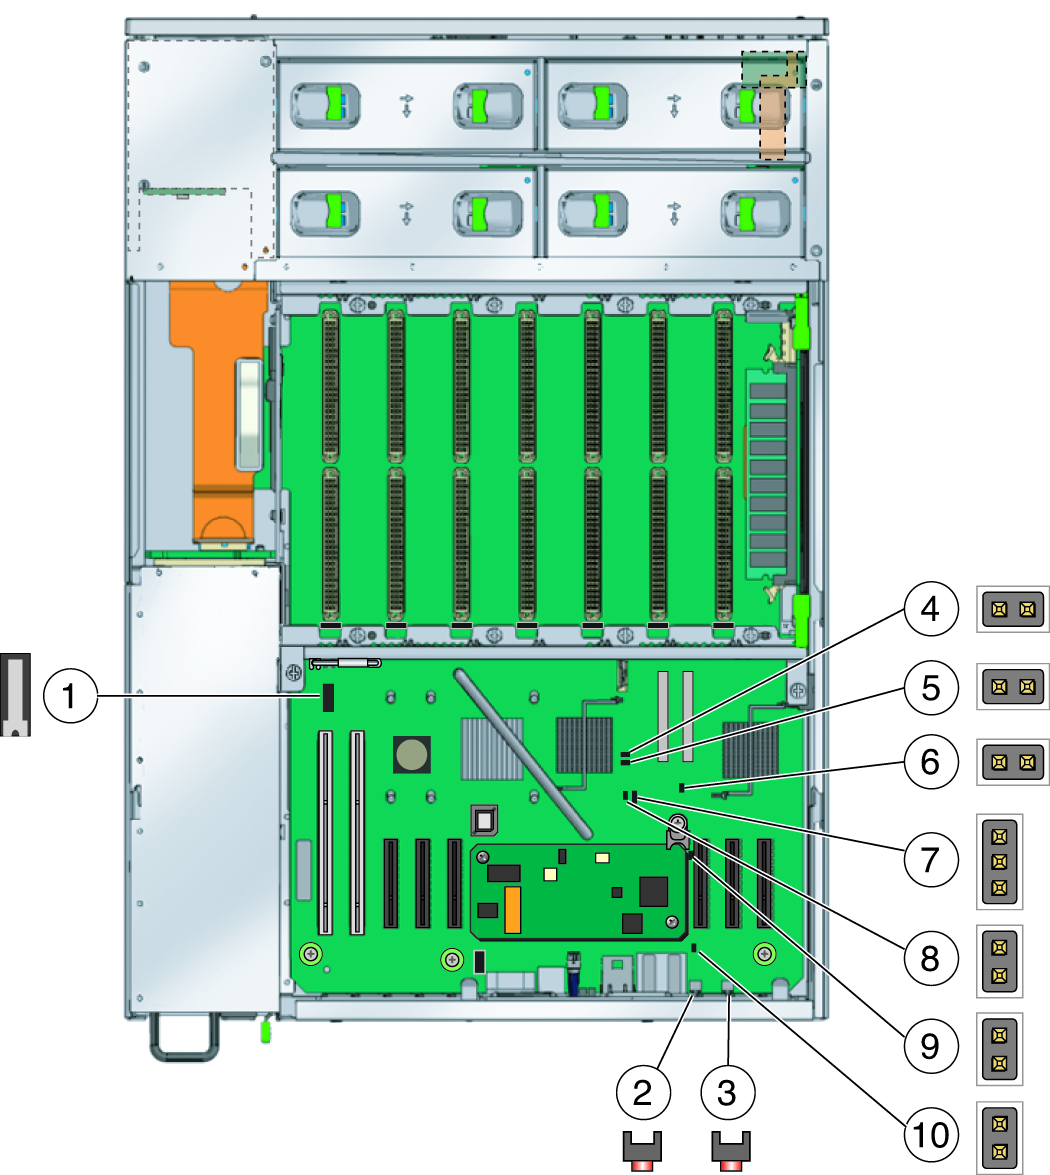 image:An illustration showing the location of the jumpers and switches on the Sun Fire X4640 server motherboard.